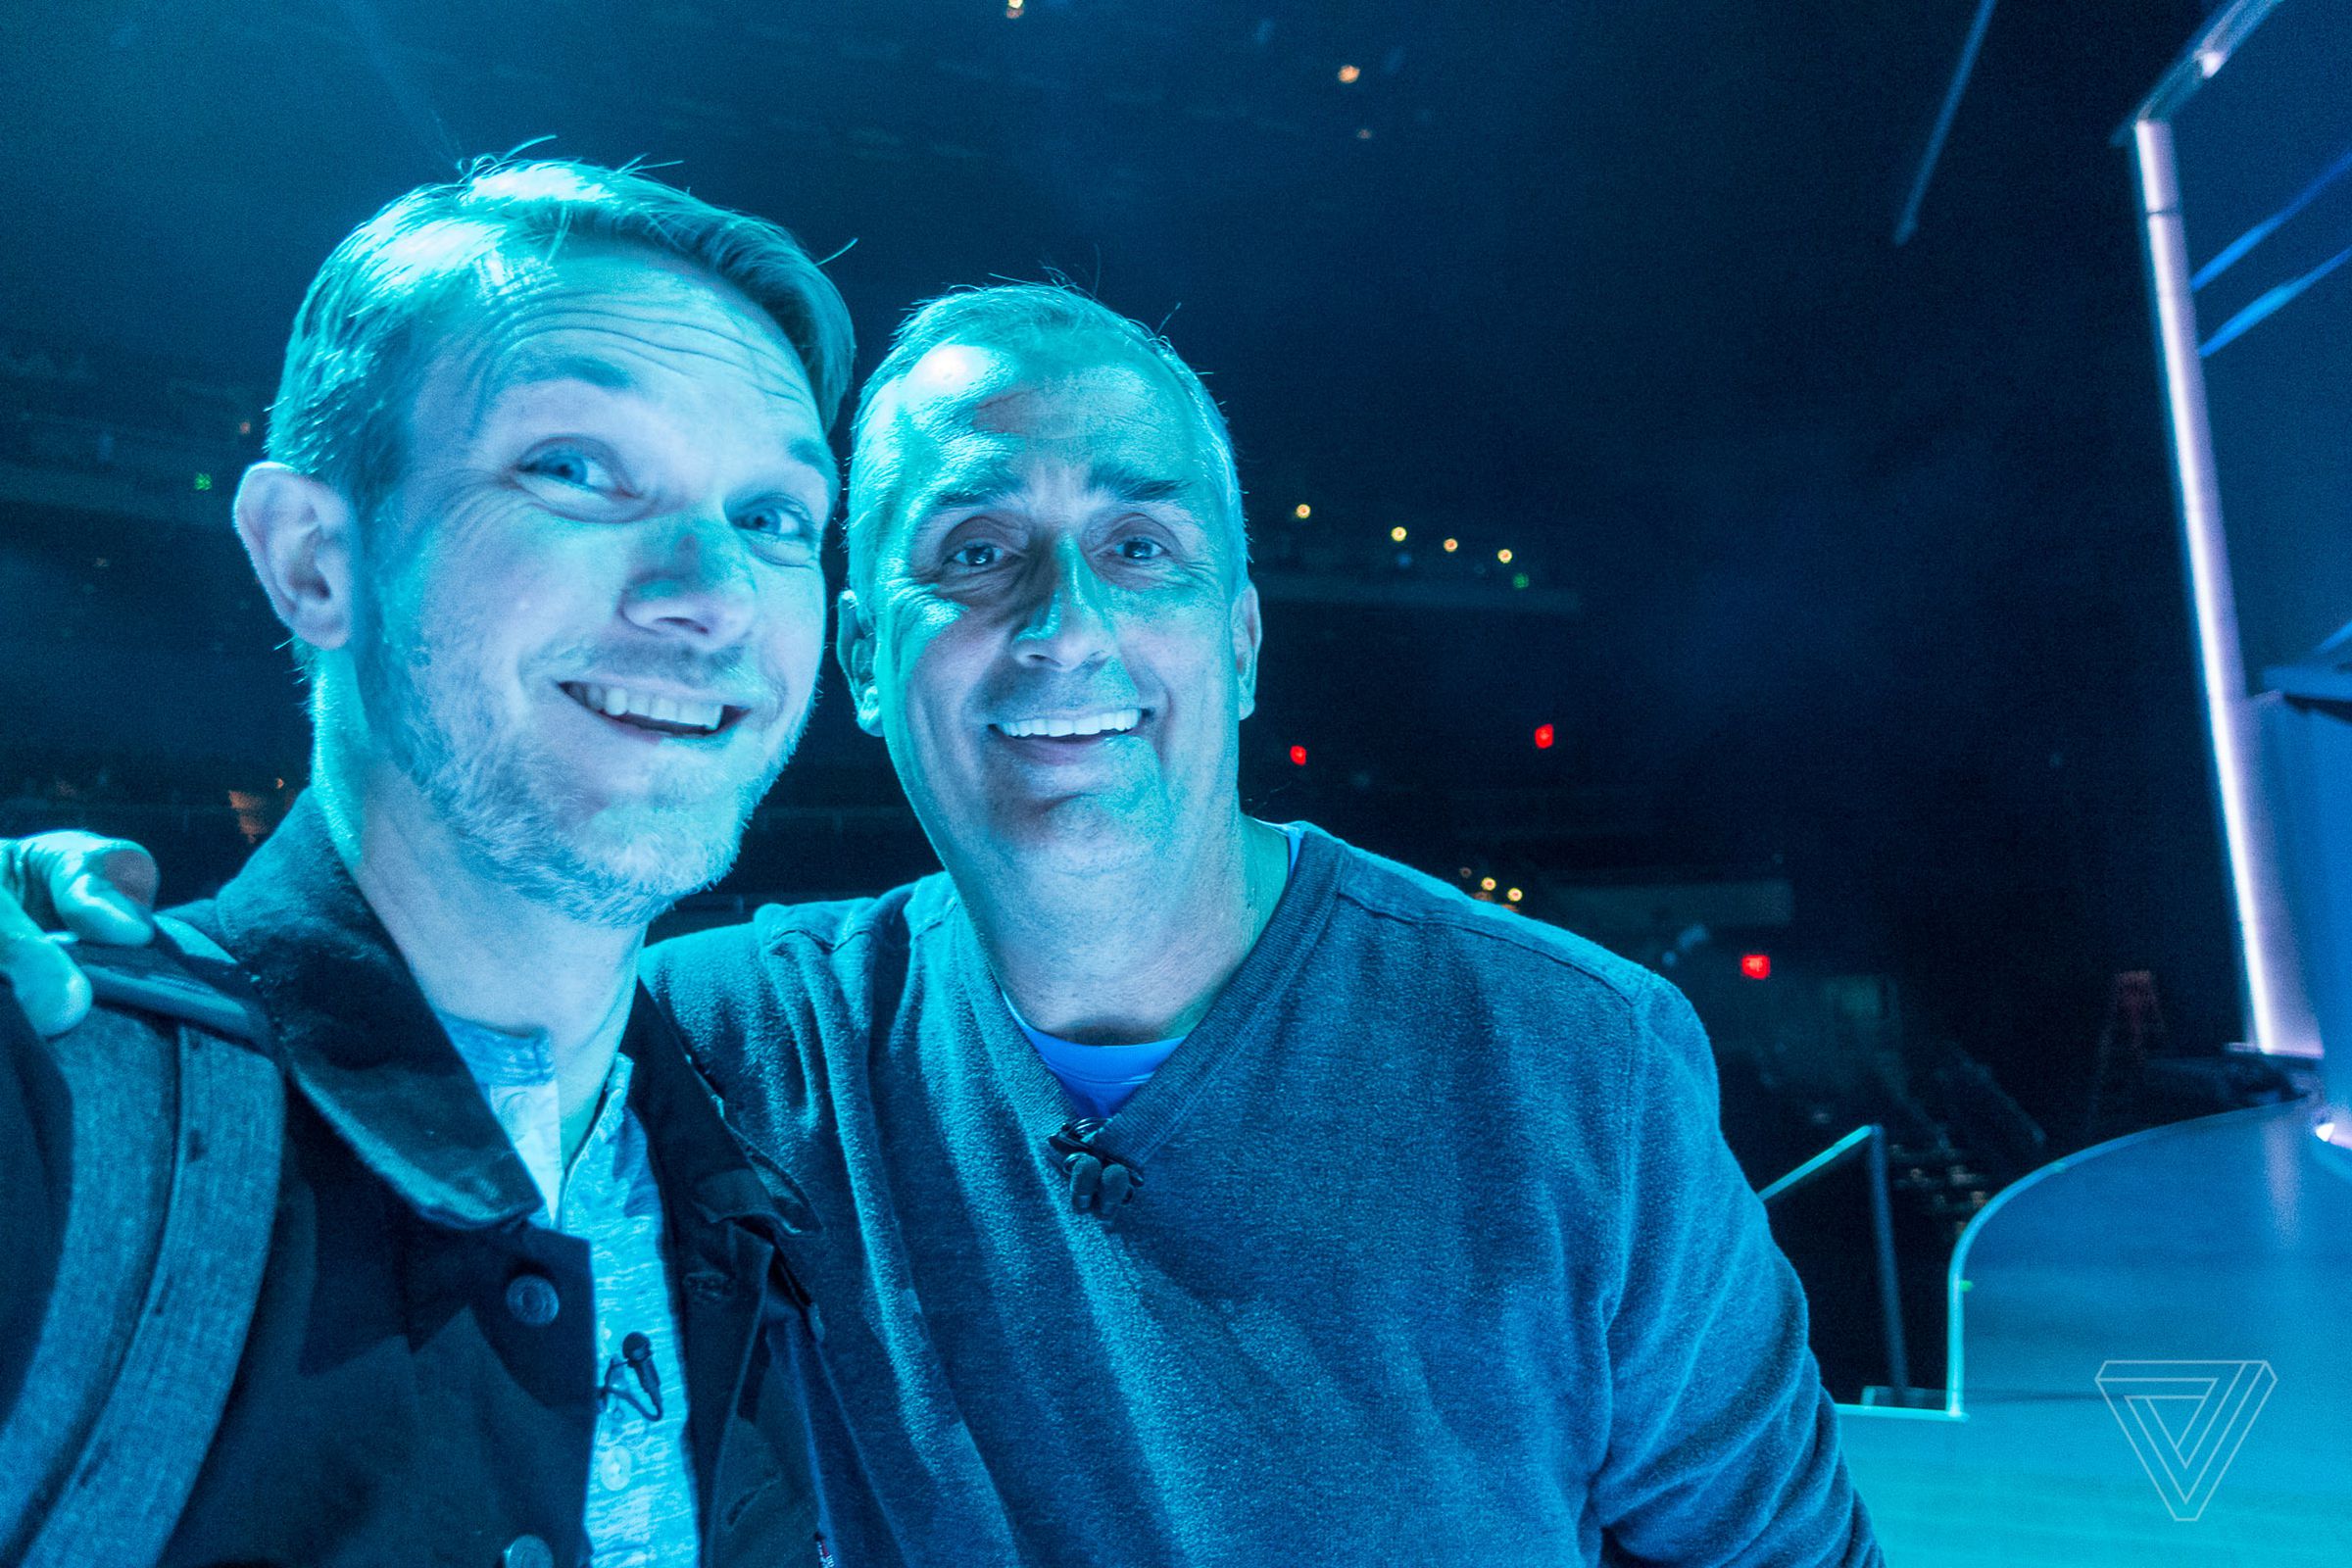 I hoped a cheerful selfie could convince CEO Brian Krzanich to change his mind about an on-the-record interview. Nope.